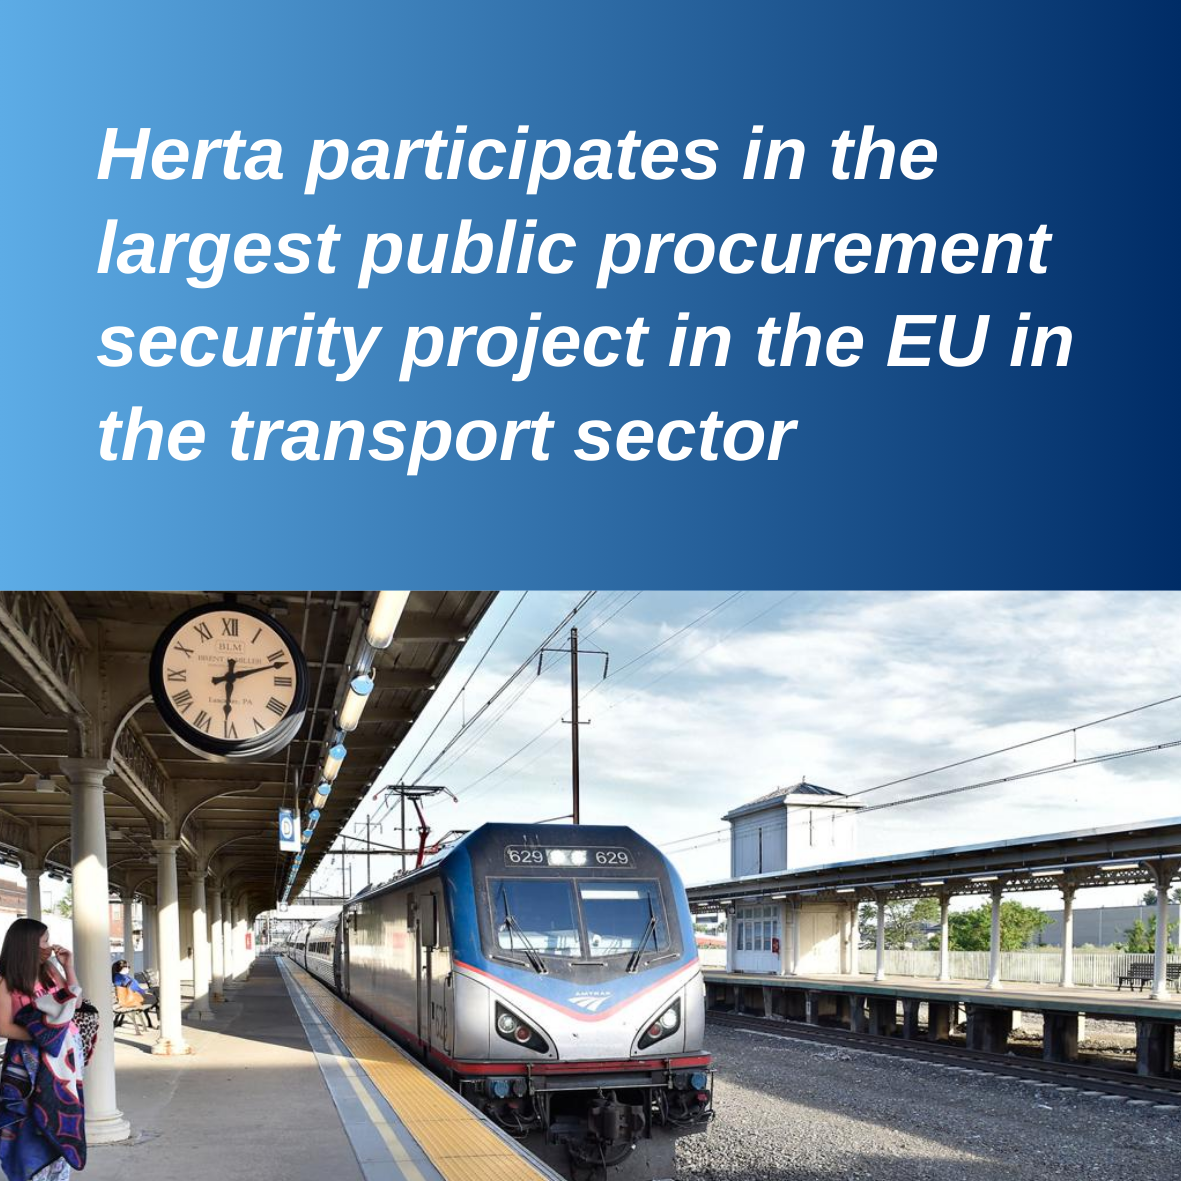 Herta participates in the largest public procurement security project in the EU in the transport sector